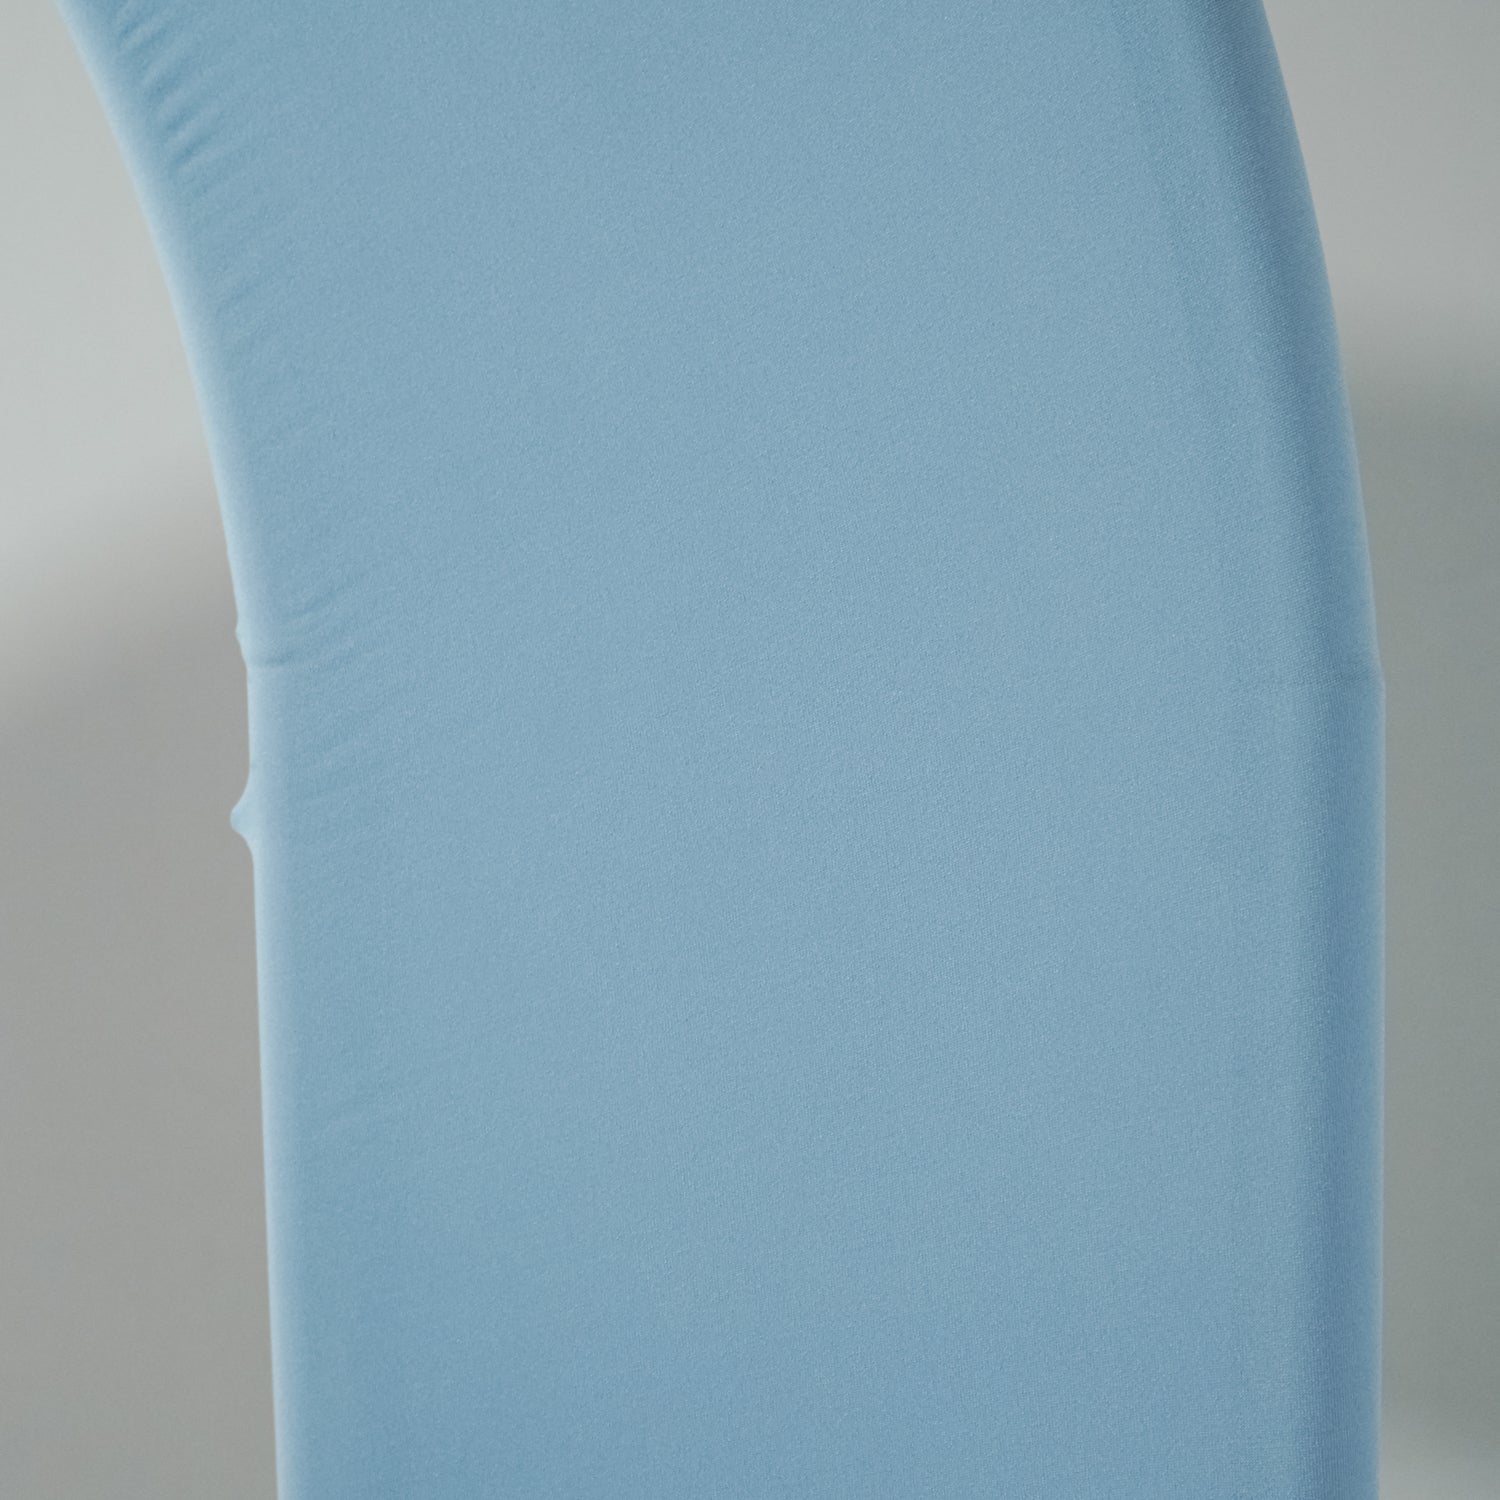 Open Center Spandex Arch Cover - Baby Blue